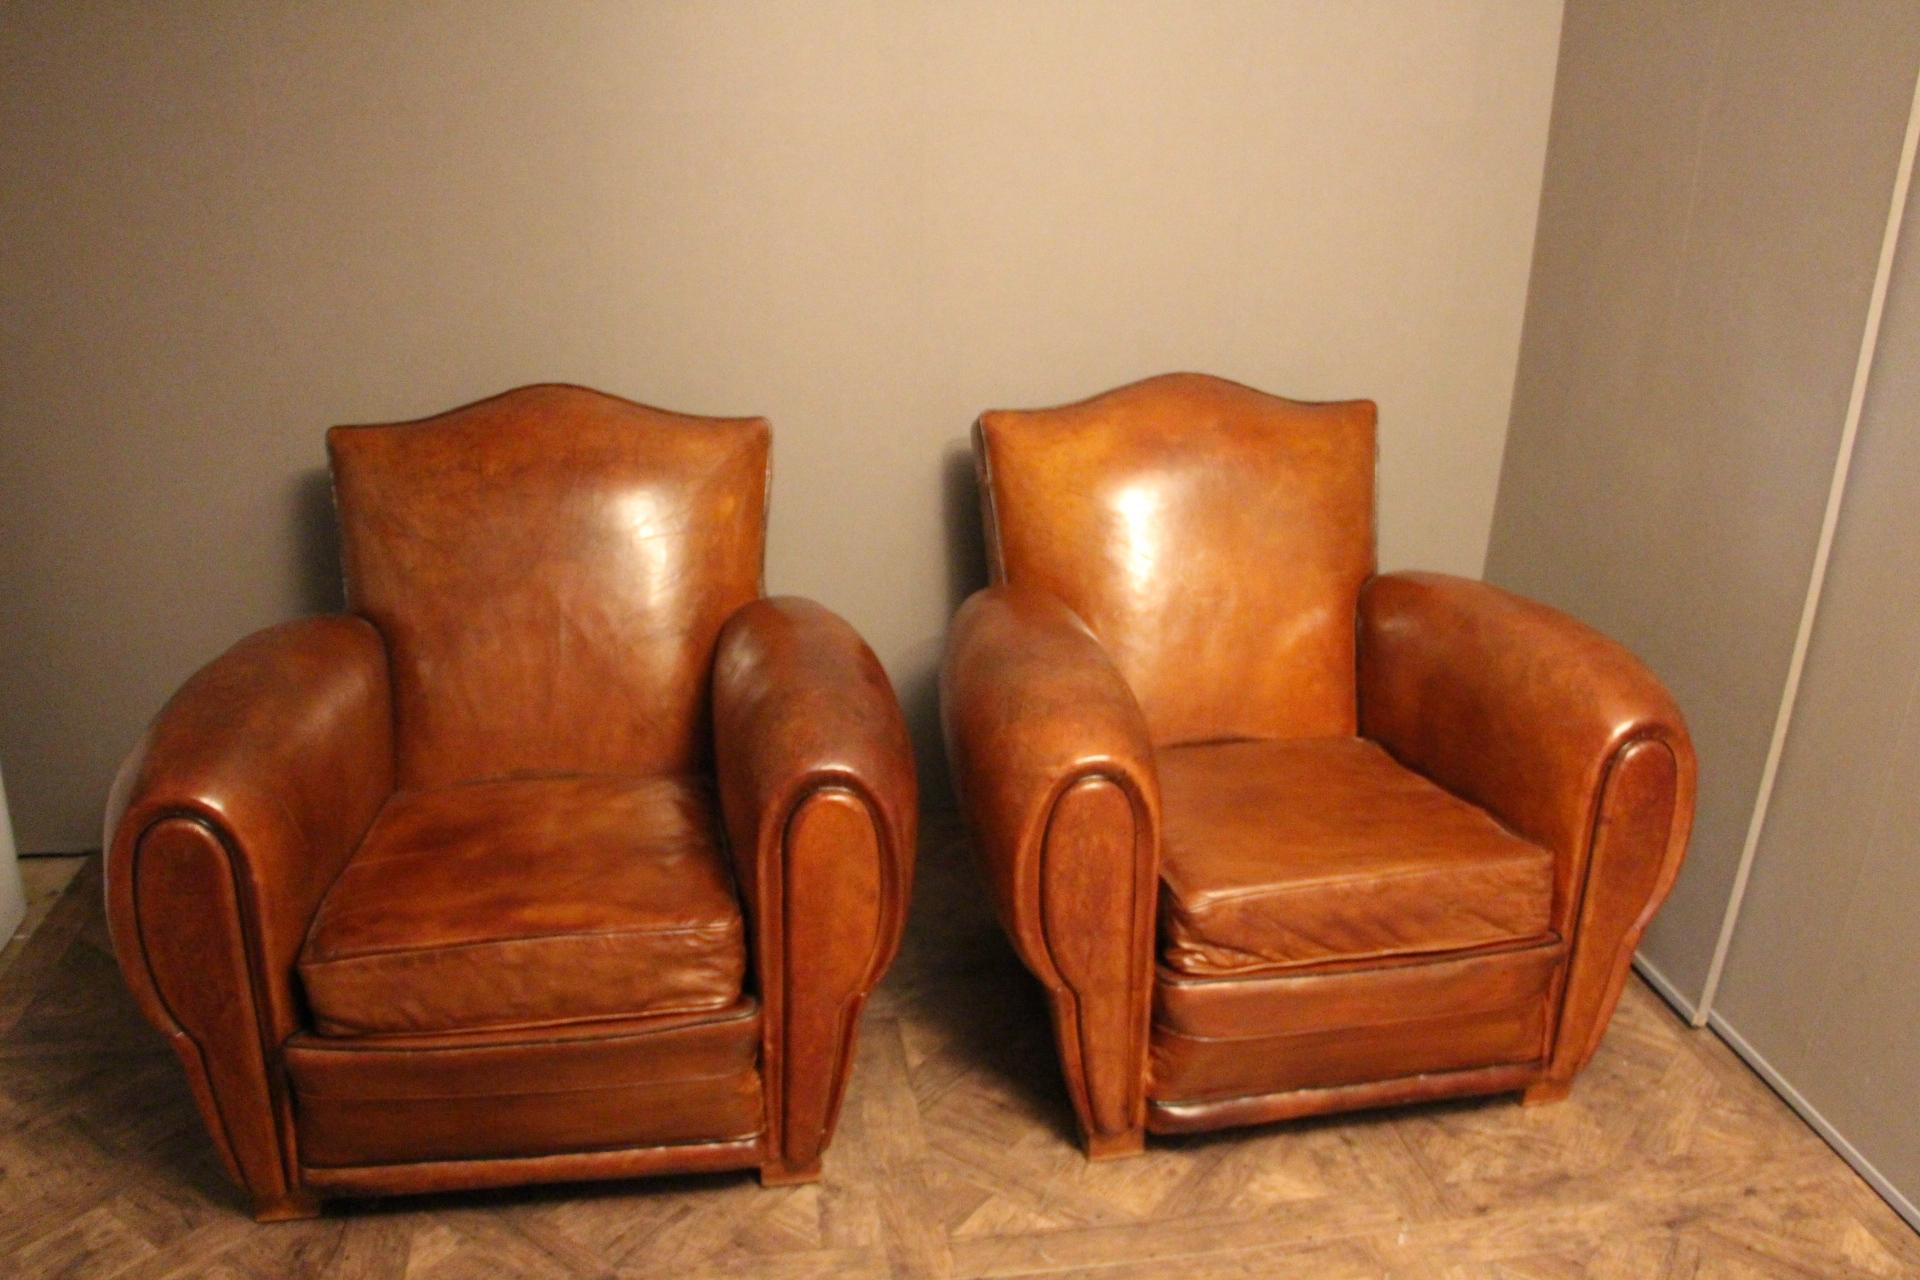 A beautiful pair of Art Deco French chairs in a rich brown patina leather.
Original leather, original upholstery which is worn but not worn out.
Classic Moustache style back and two separate seat cushions.